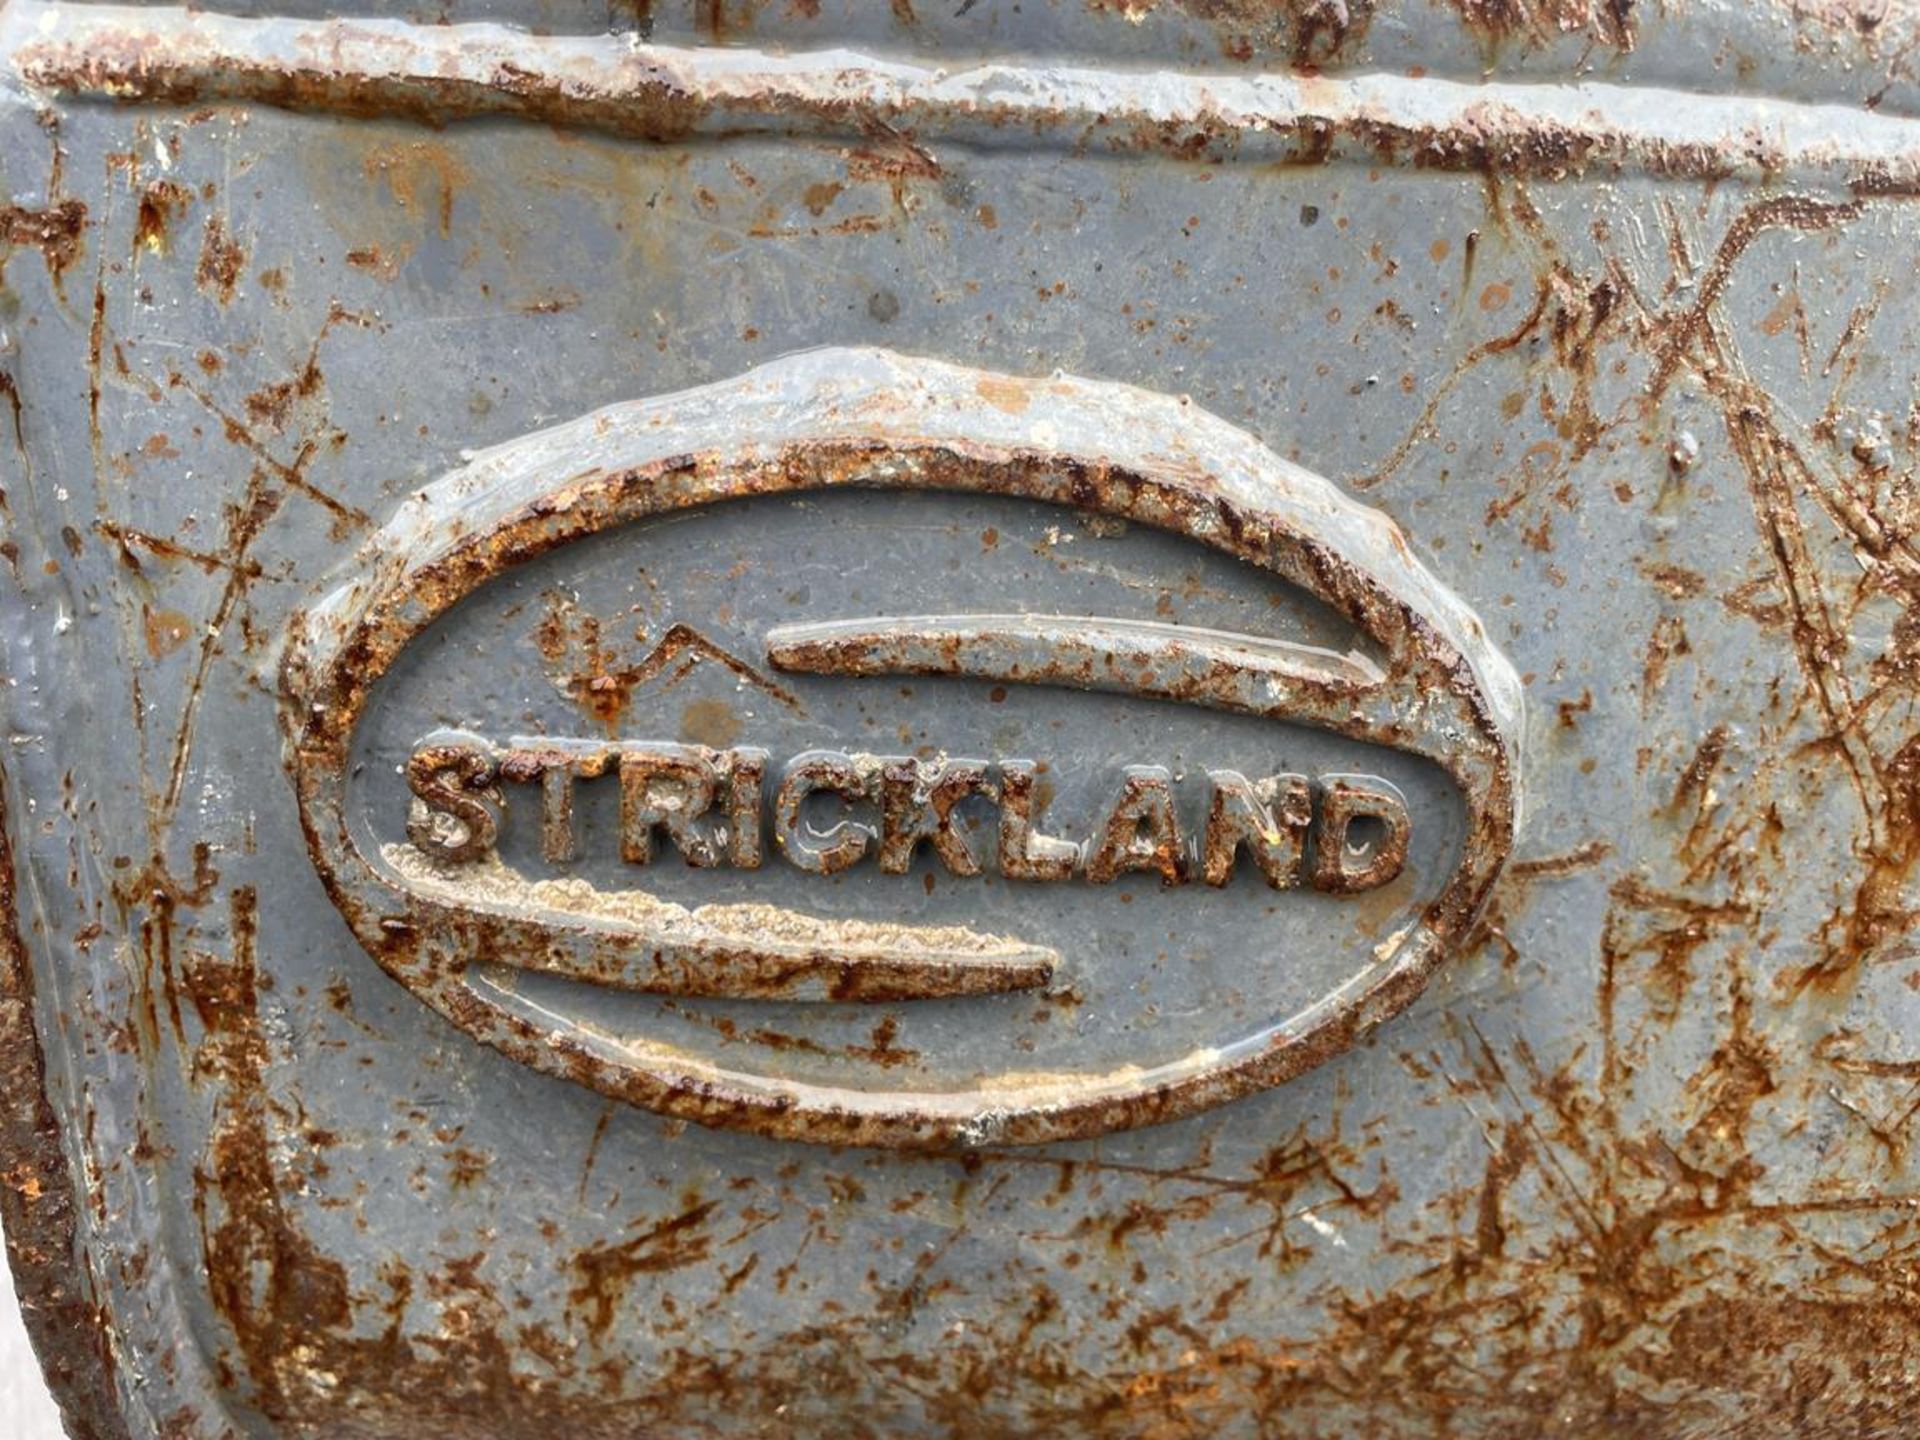 Strickland Compartmentalised Steel Bucket, Measeures c.1.2x0.4m - Image 3 of 5